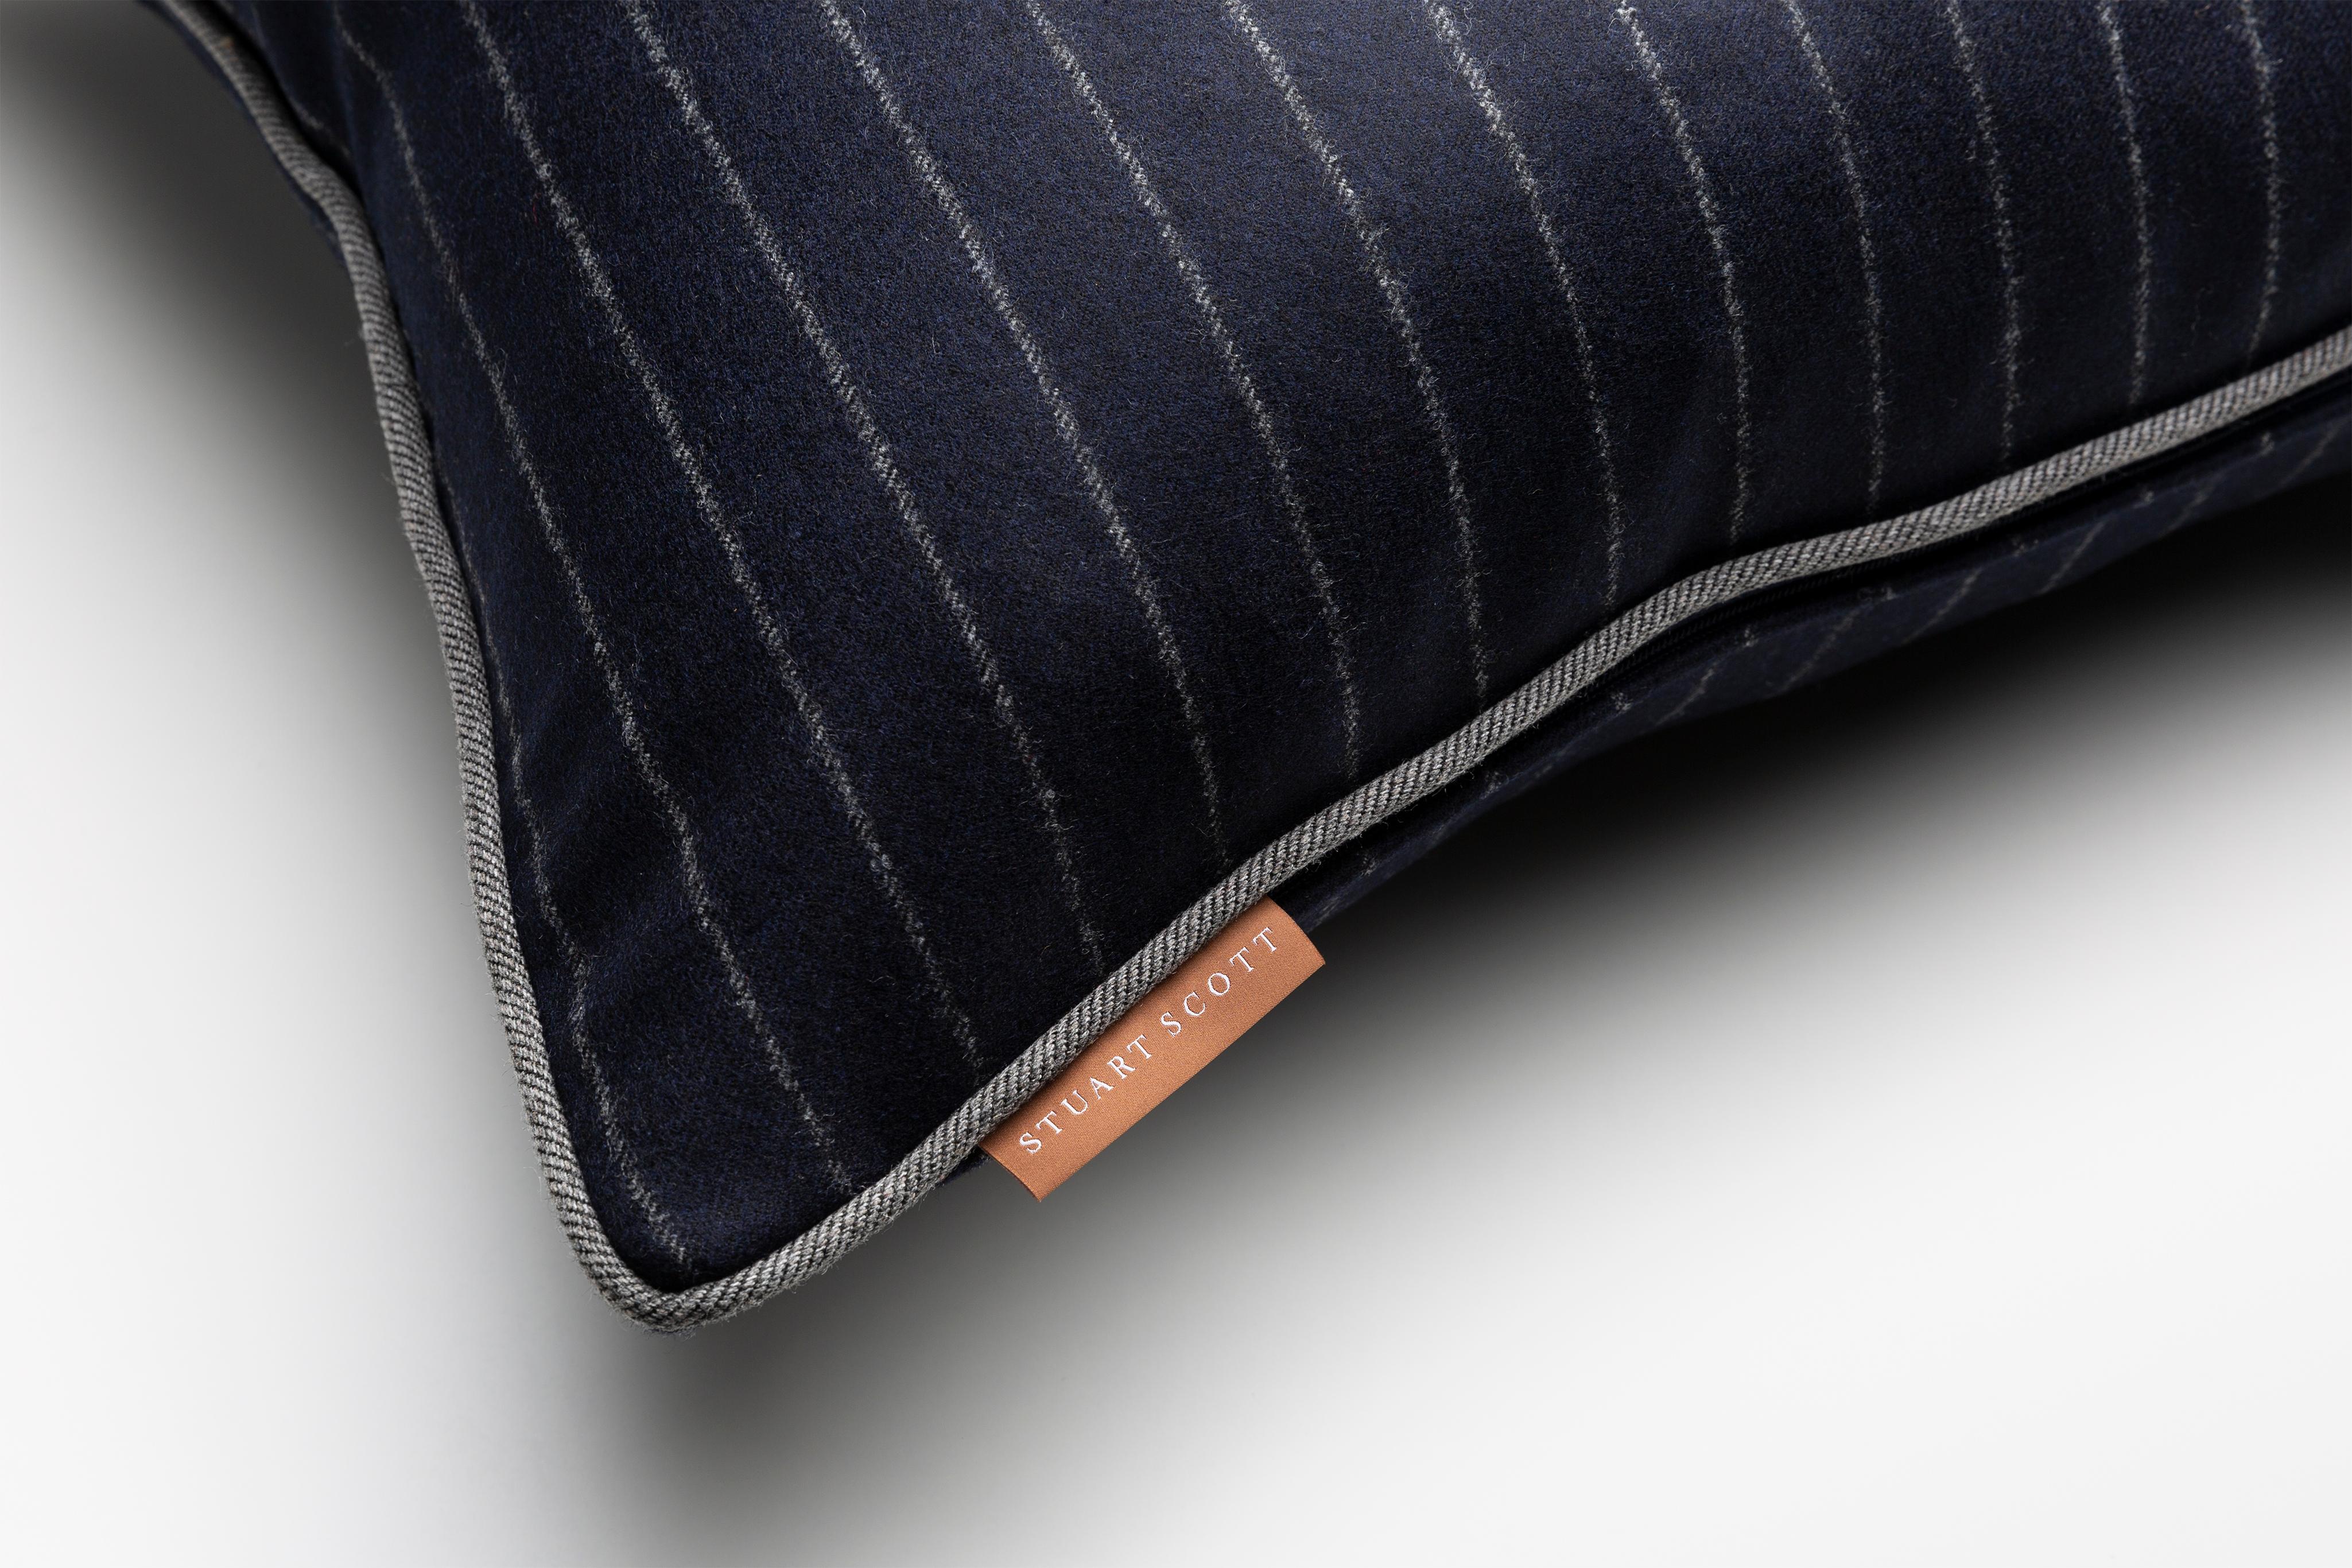 The Signature cushion is soft and sumptuous with an elegant pattern of delicate pinstripes, an ideally classic and handsome accessory for your lounging space.

Savile Row Navy chalk stripe wool with tailored grey piping and a luxurious feather and